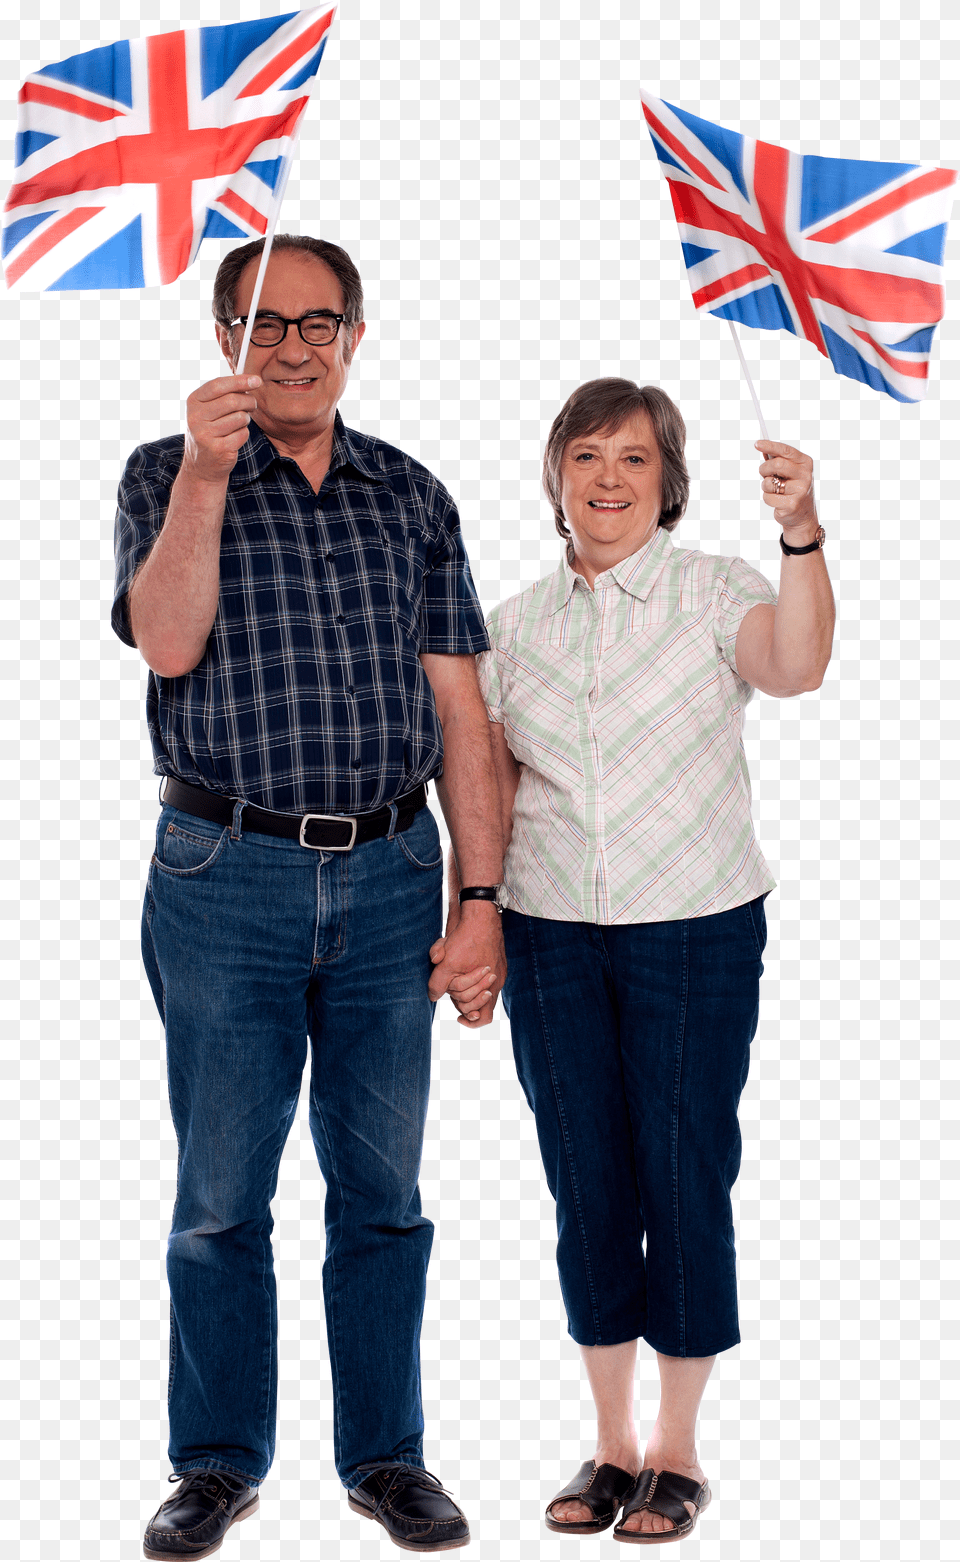 Old Couple Image Flag Of The United States, Accessories, Ornament, Jewelry, Gemstone Png